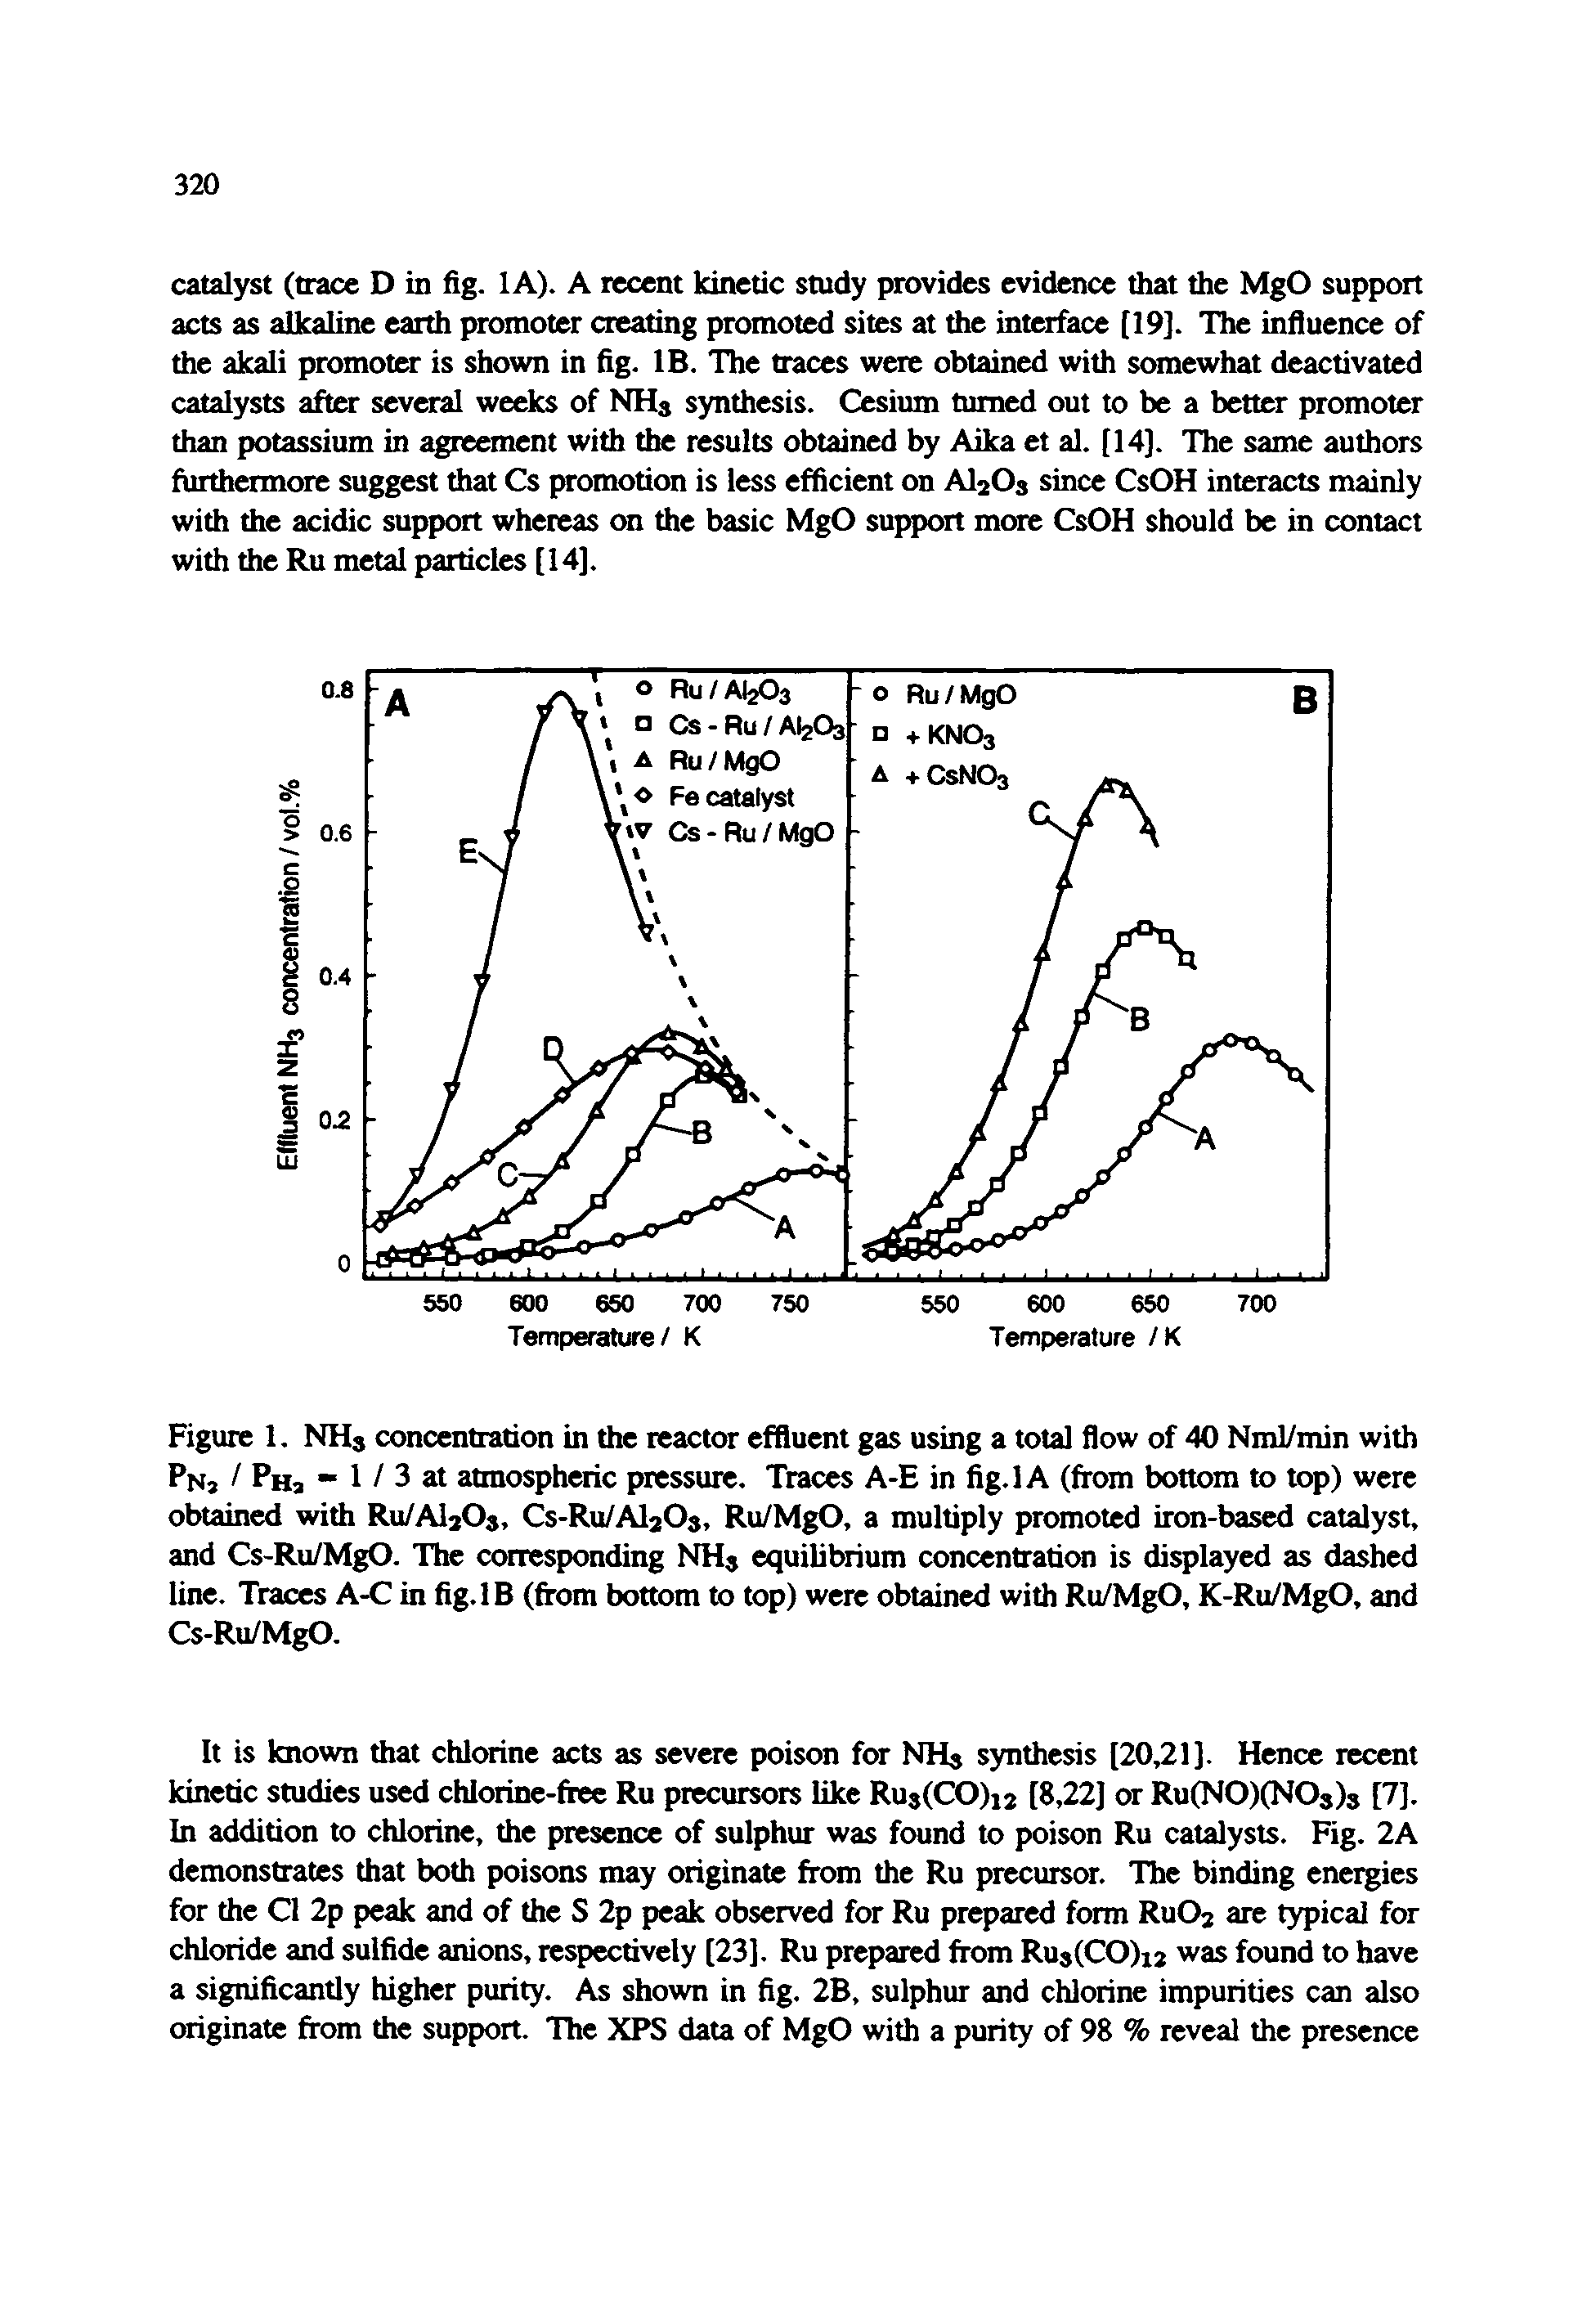 Figure 1. NHj concentration in the reactor effluent gas using a total flow of 40 Nml/min with Pnj Phs - 1 / 3 at atmospheric pressure. Traces A-E in fig.lA (from bottom to top) were obtained with Ru/AljOj, CS-RU/AI2O3, Ru/MgO, a multiply promoted iron-based catalyst, and Cs-Ru/MgO. The corresponding NH3 equilibrium concentration is displayed as dashed line. Traces A-C in fig.IB (from bottom to top) were obtained with Ru/MgO, K-Ru/MgO, and Cs-Ru/MgO.